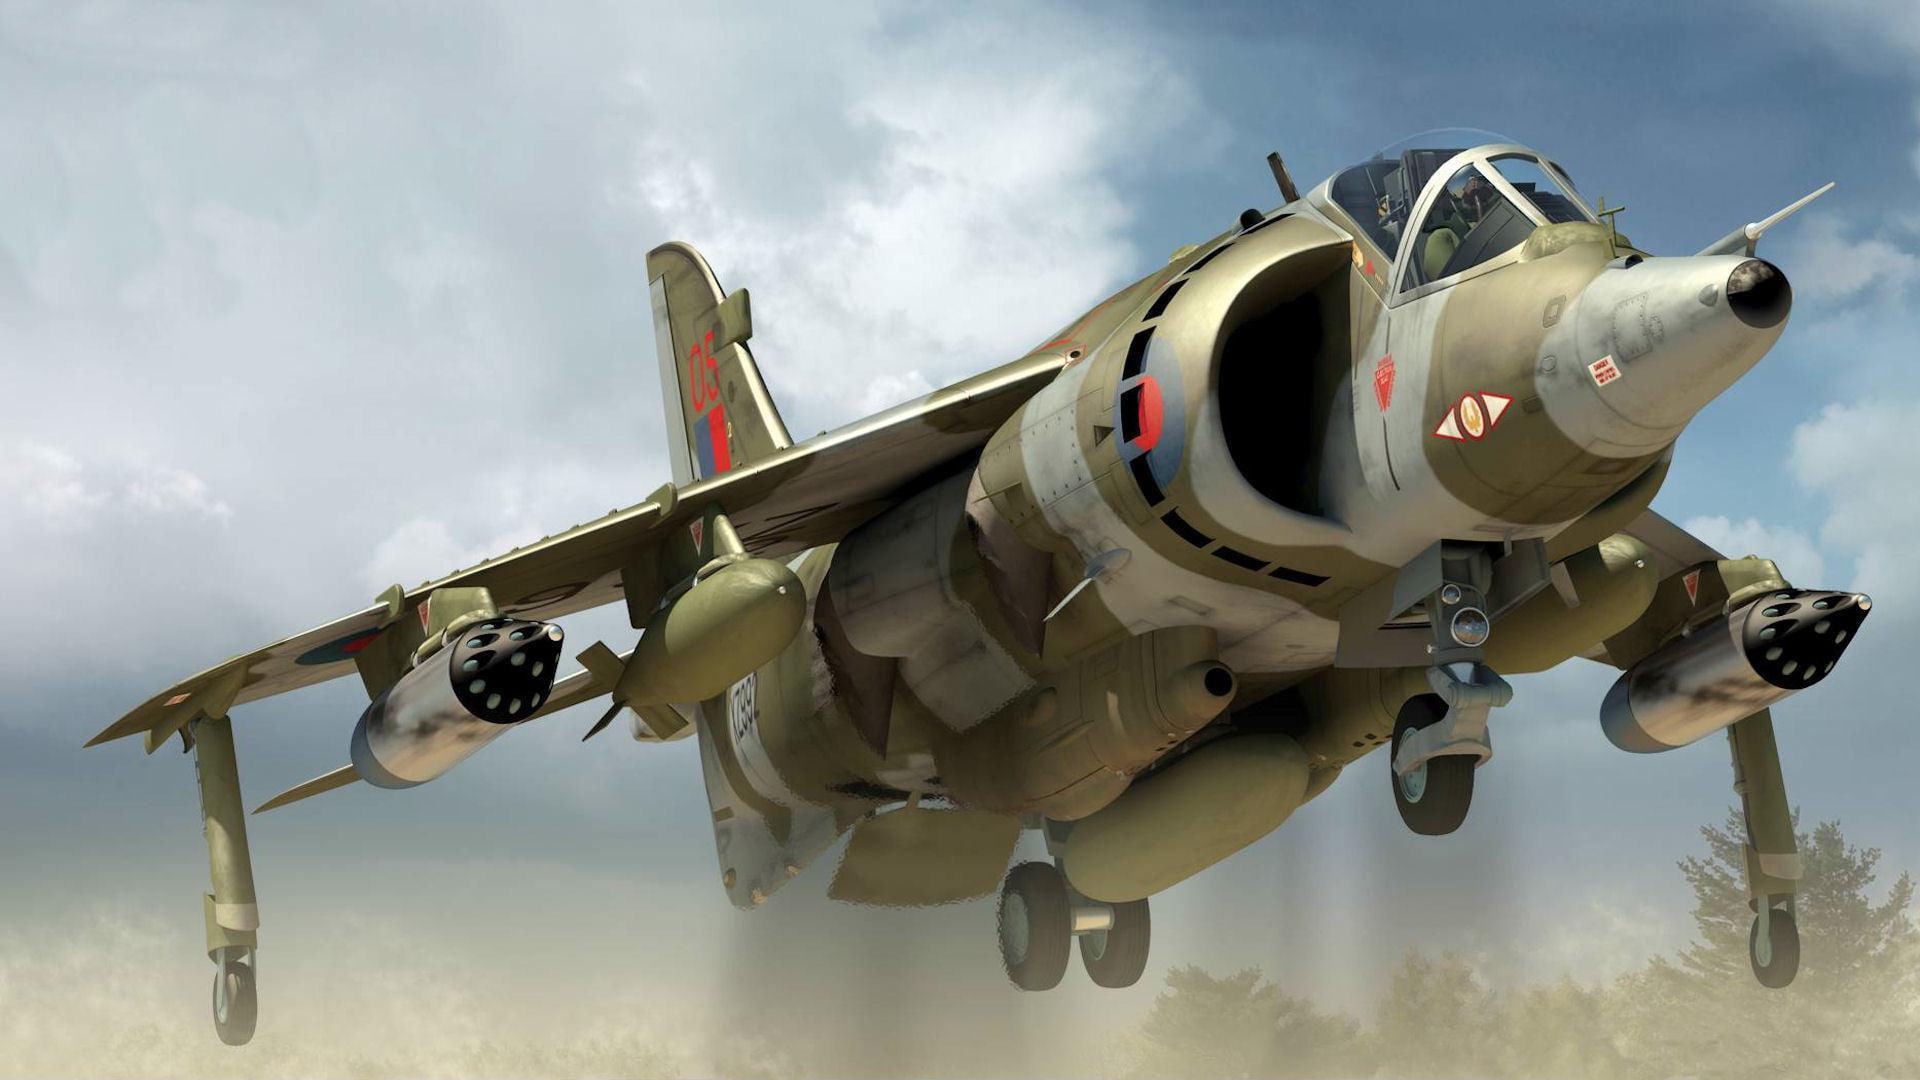 Hawker Siddeley Harrier, olive green and grey fighter plane, aircraft